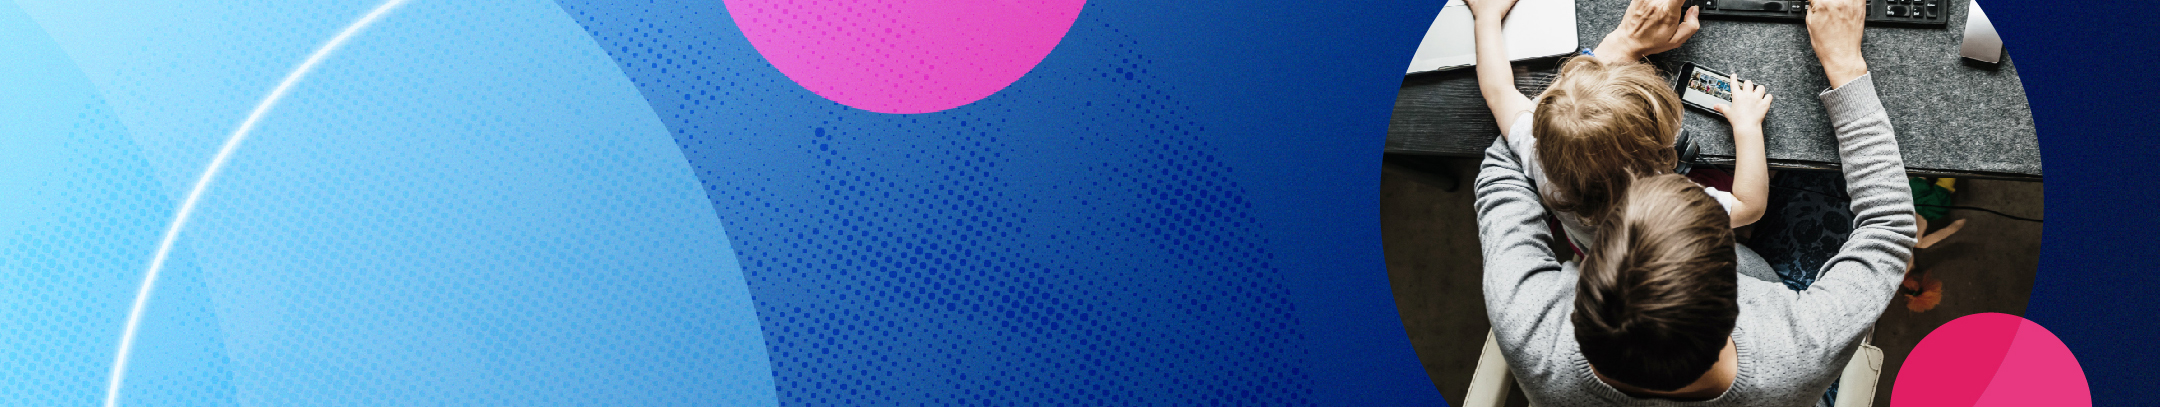 Blue and pink circle illustration next to a man with a child on his lap